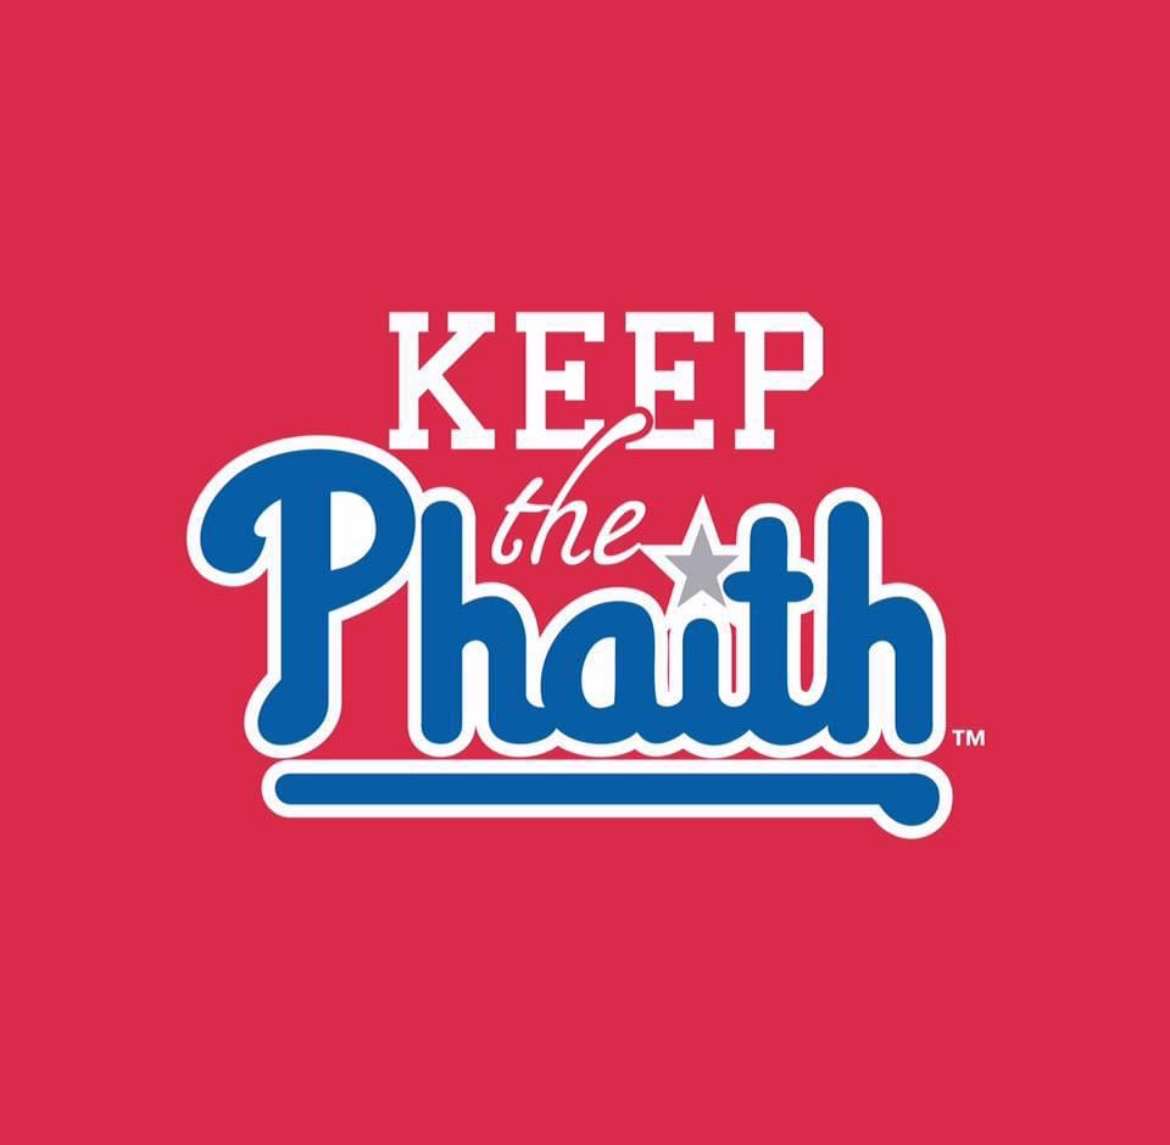 Keep the Phaith supports grieving families by partnering with the Phillies